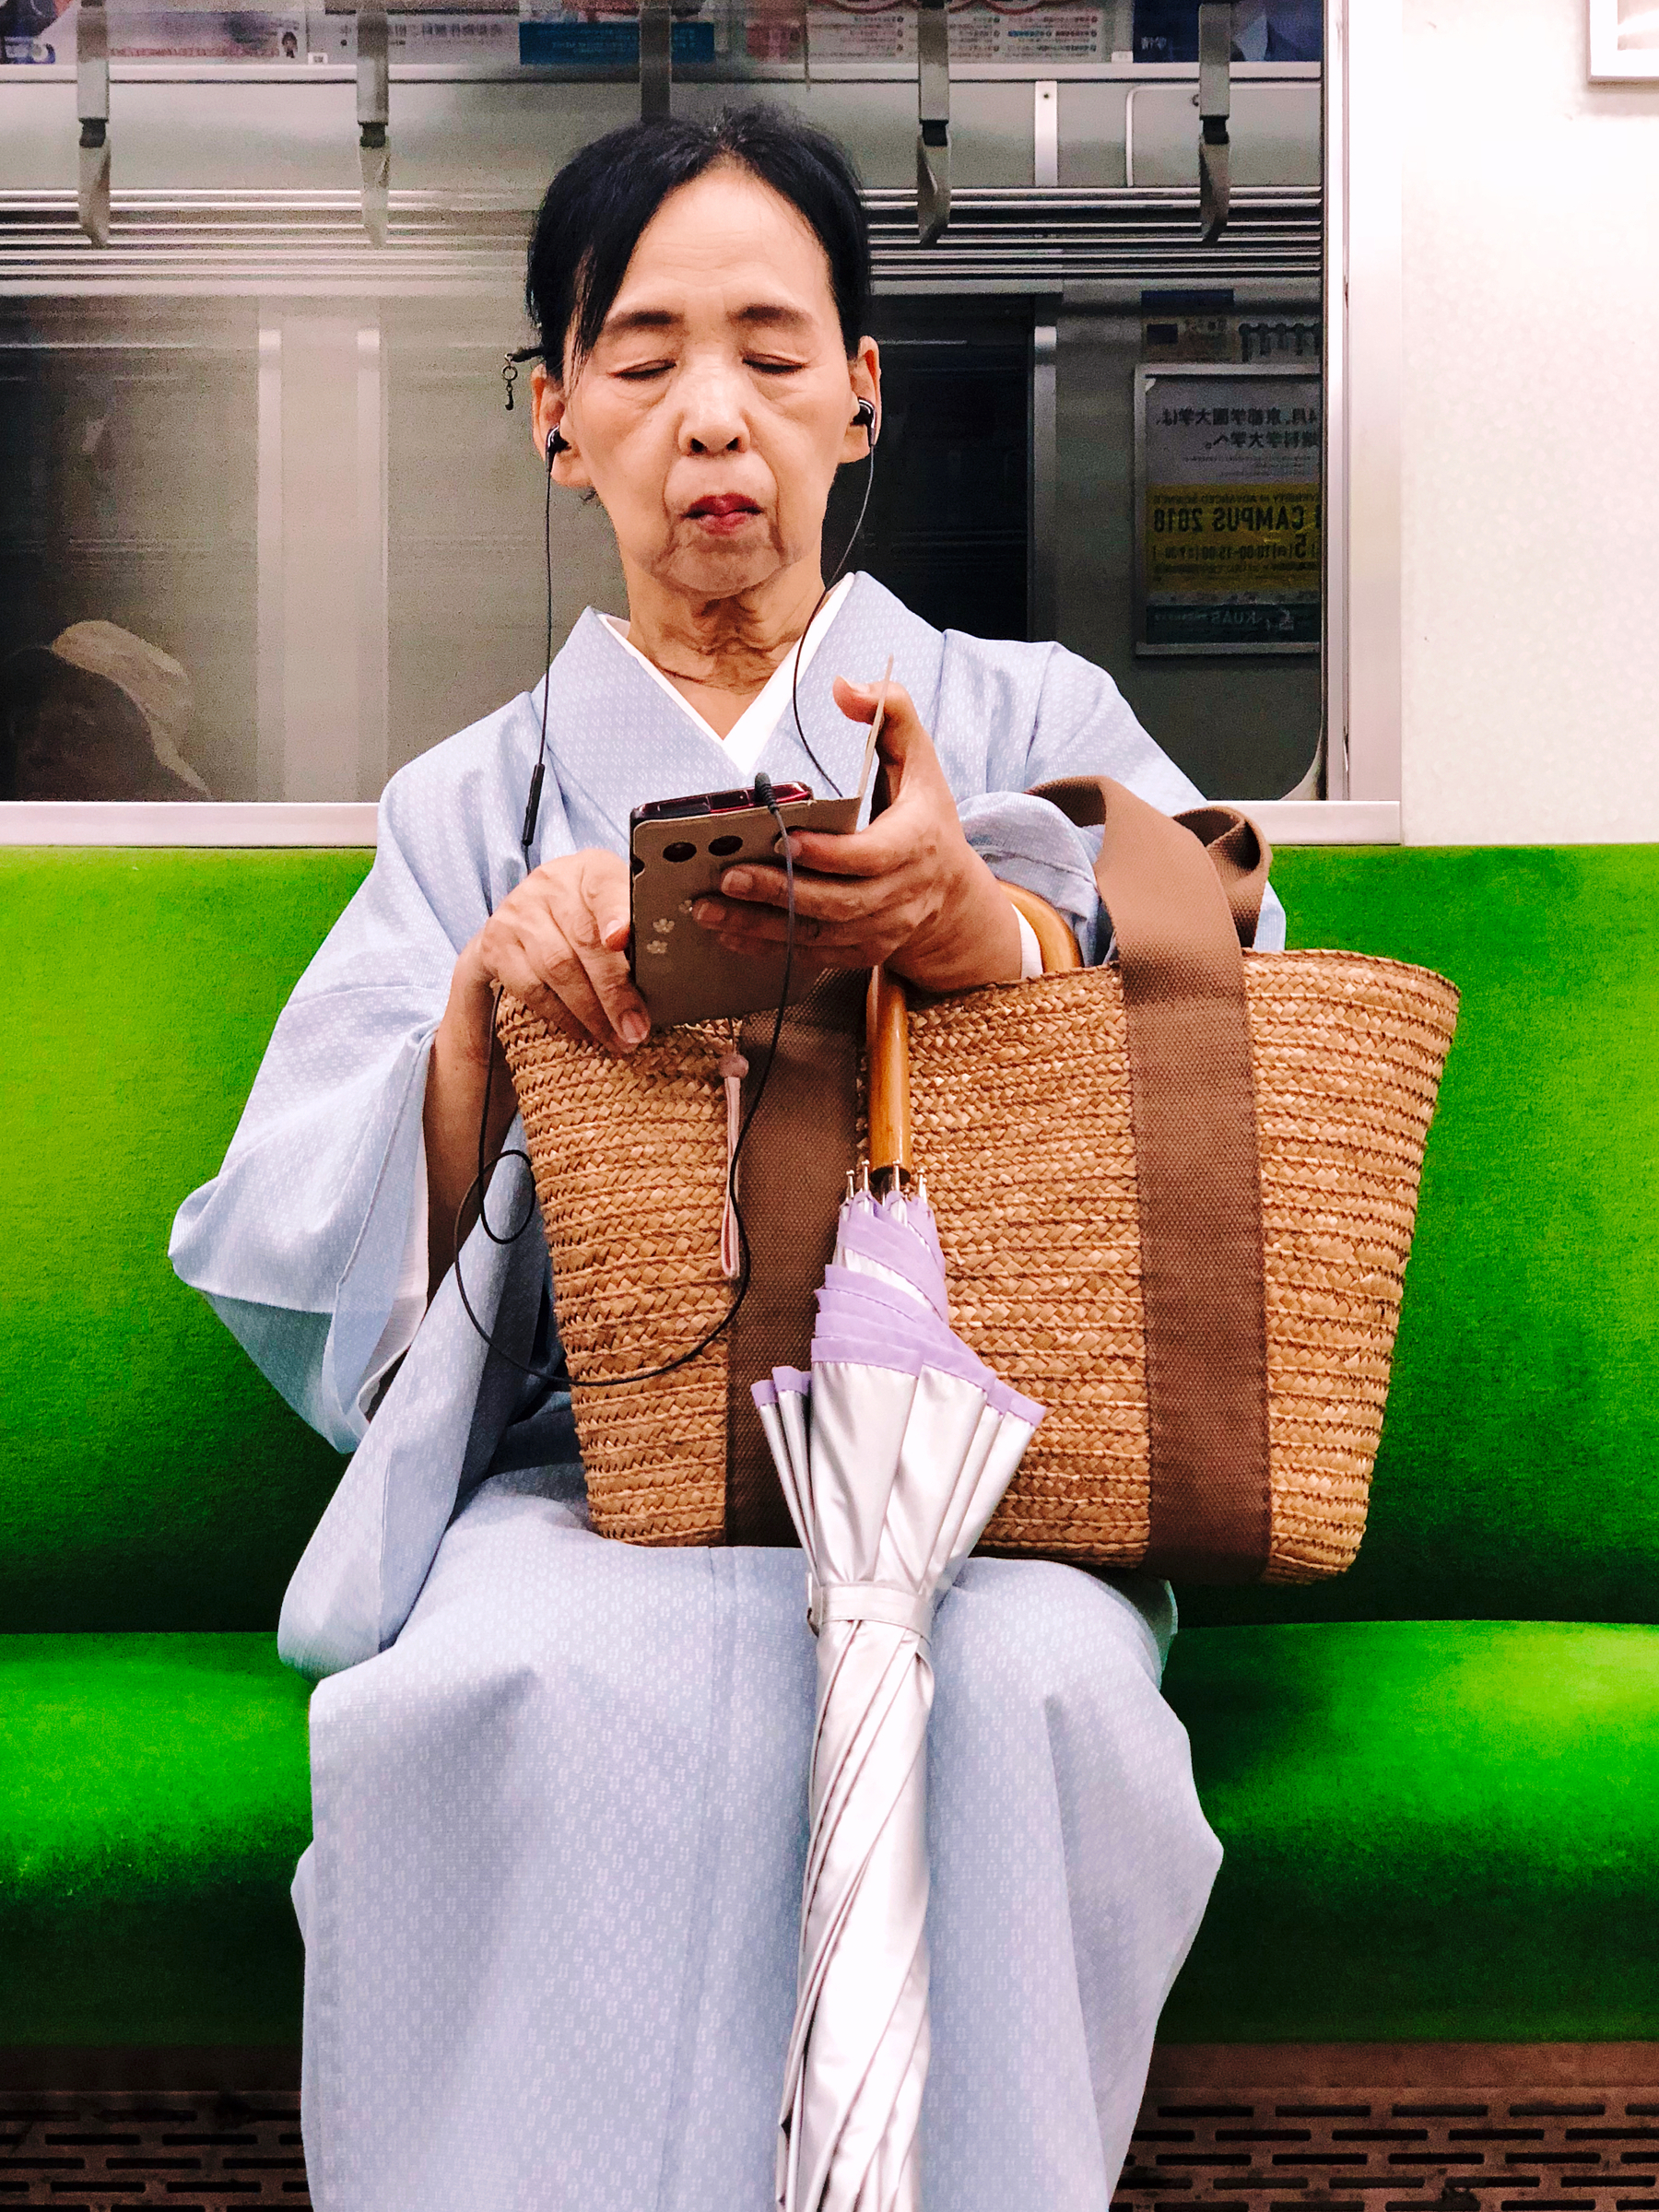 A woman in traditional Japanese outfit sits on a green train seat, holding a bag, an umbrella, and her phone. She has headphones on, and her eyes are closed. 